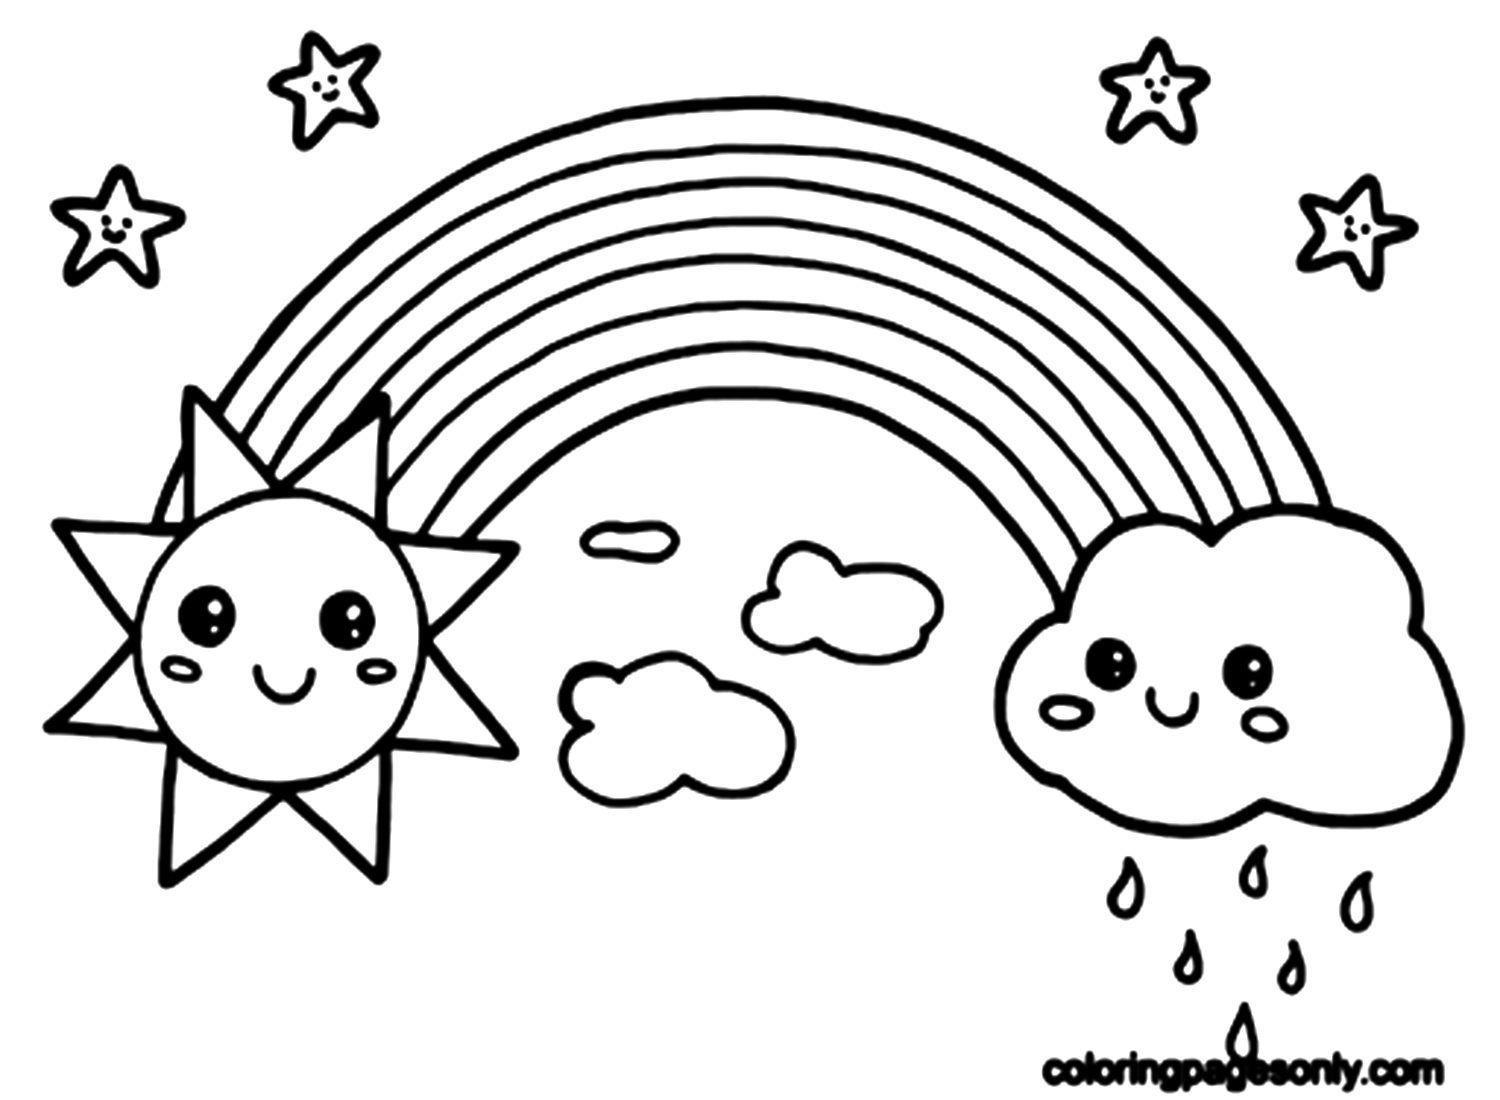 Rainbow With Sun And Clouds Coloring Pages